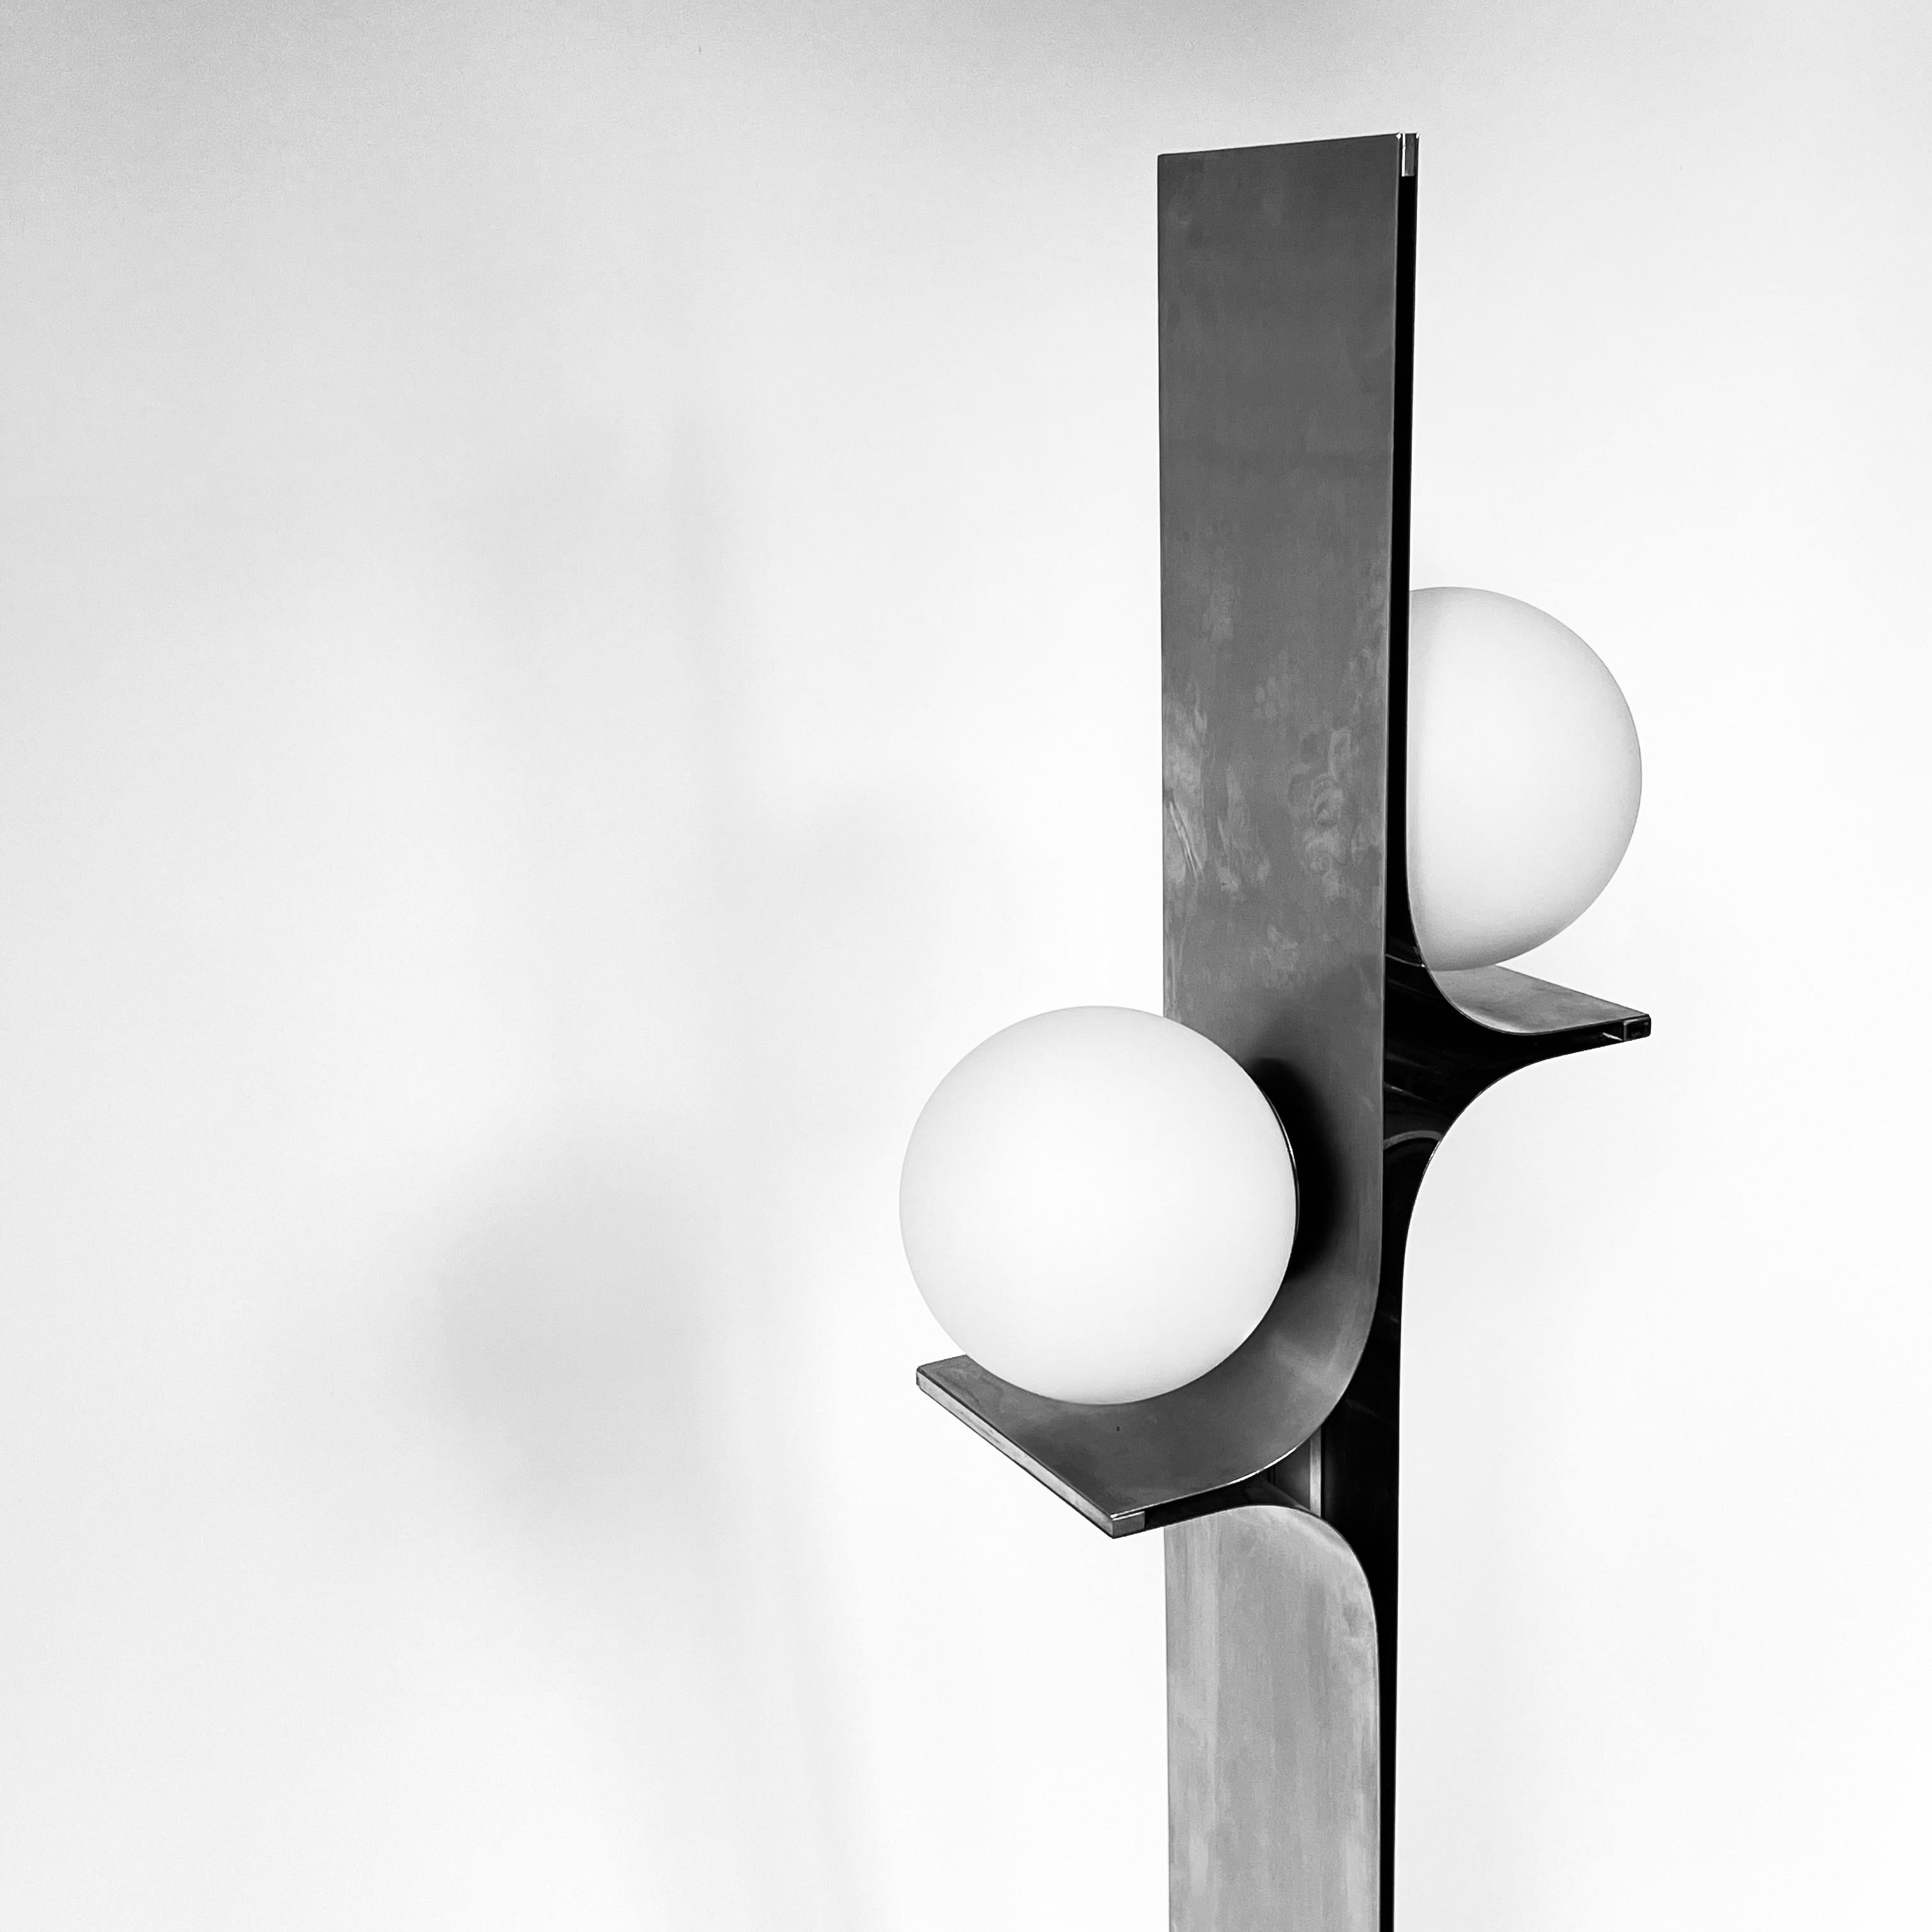 French Space age floor lamp in brushed steel, 1970 design attributed to François Monnet